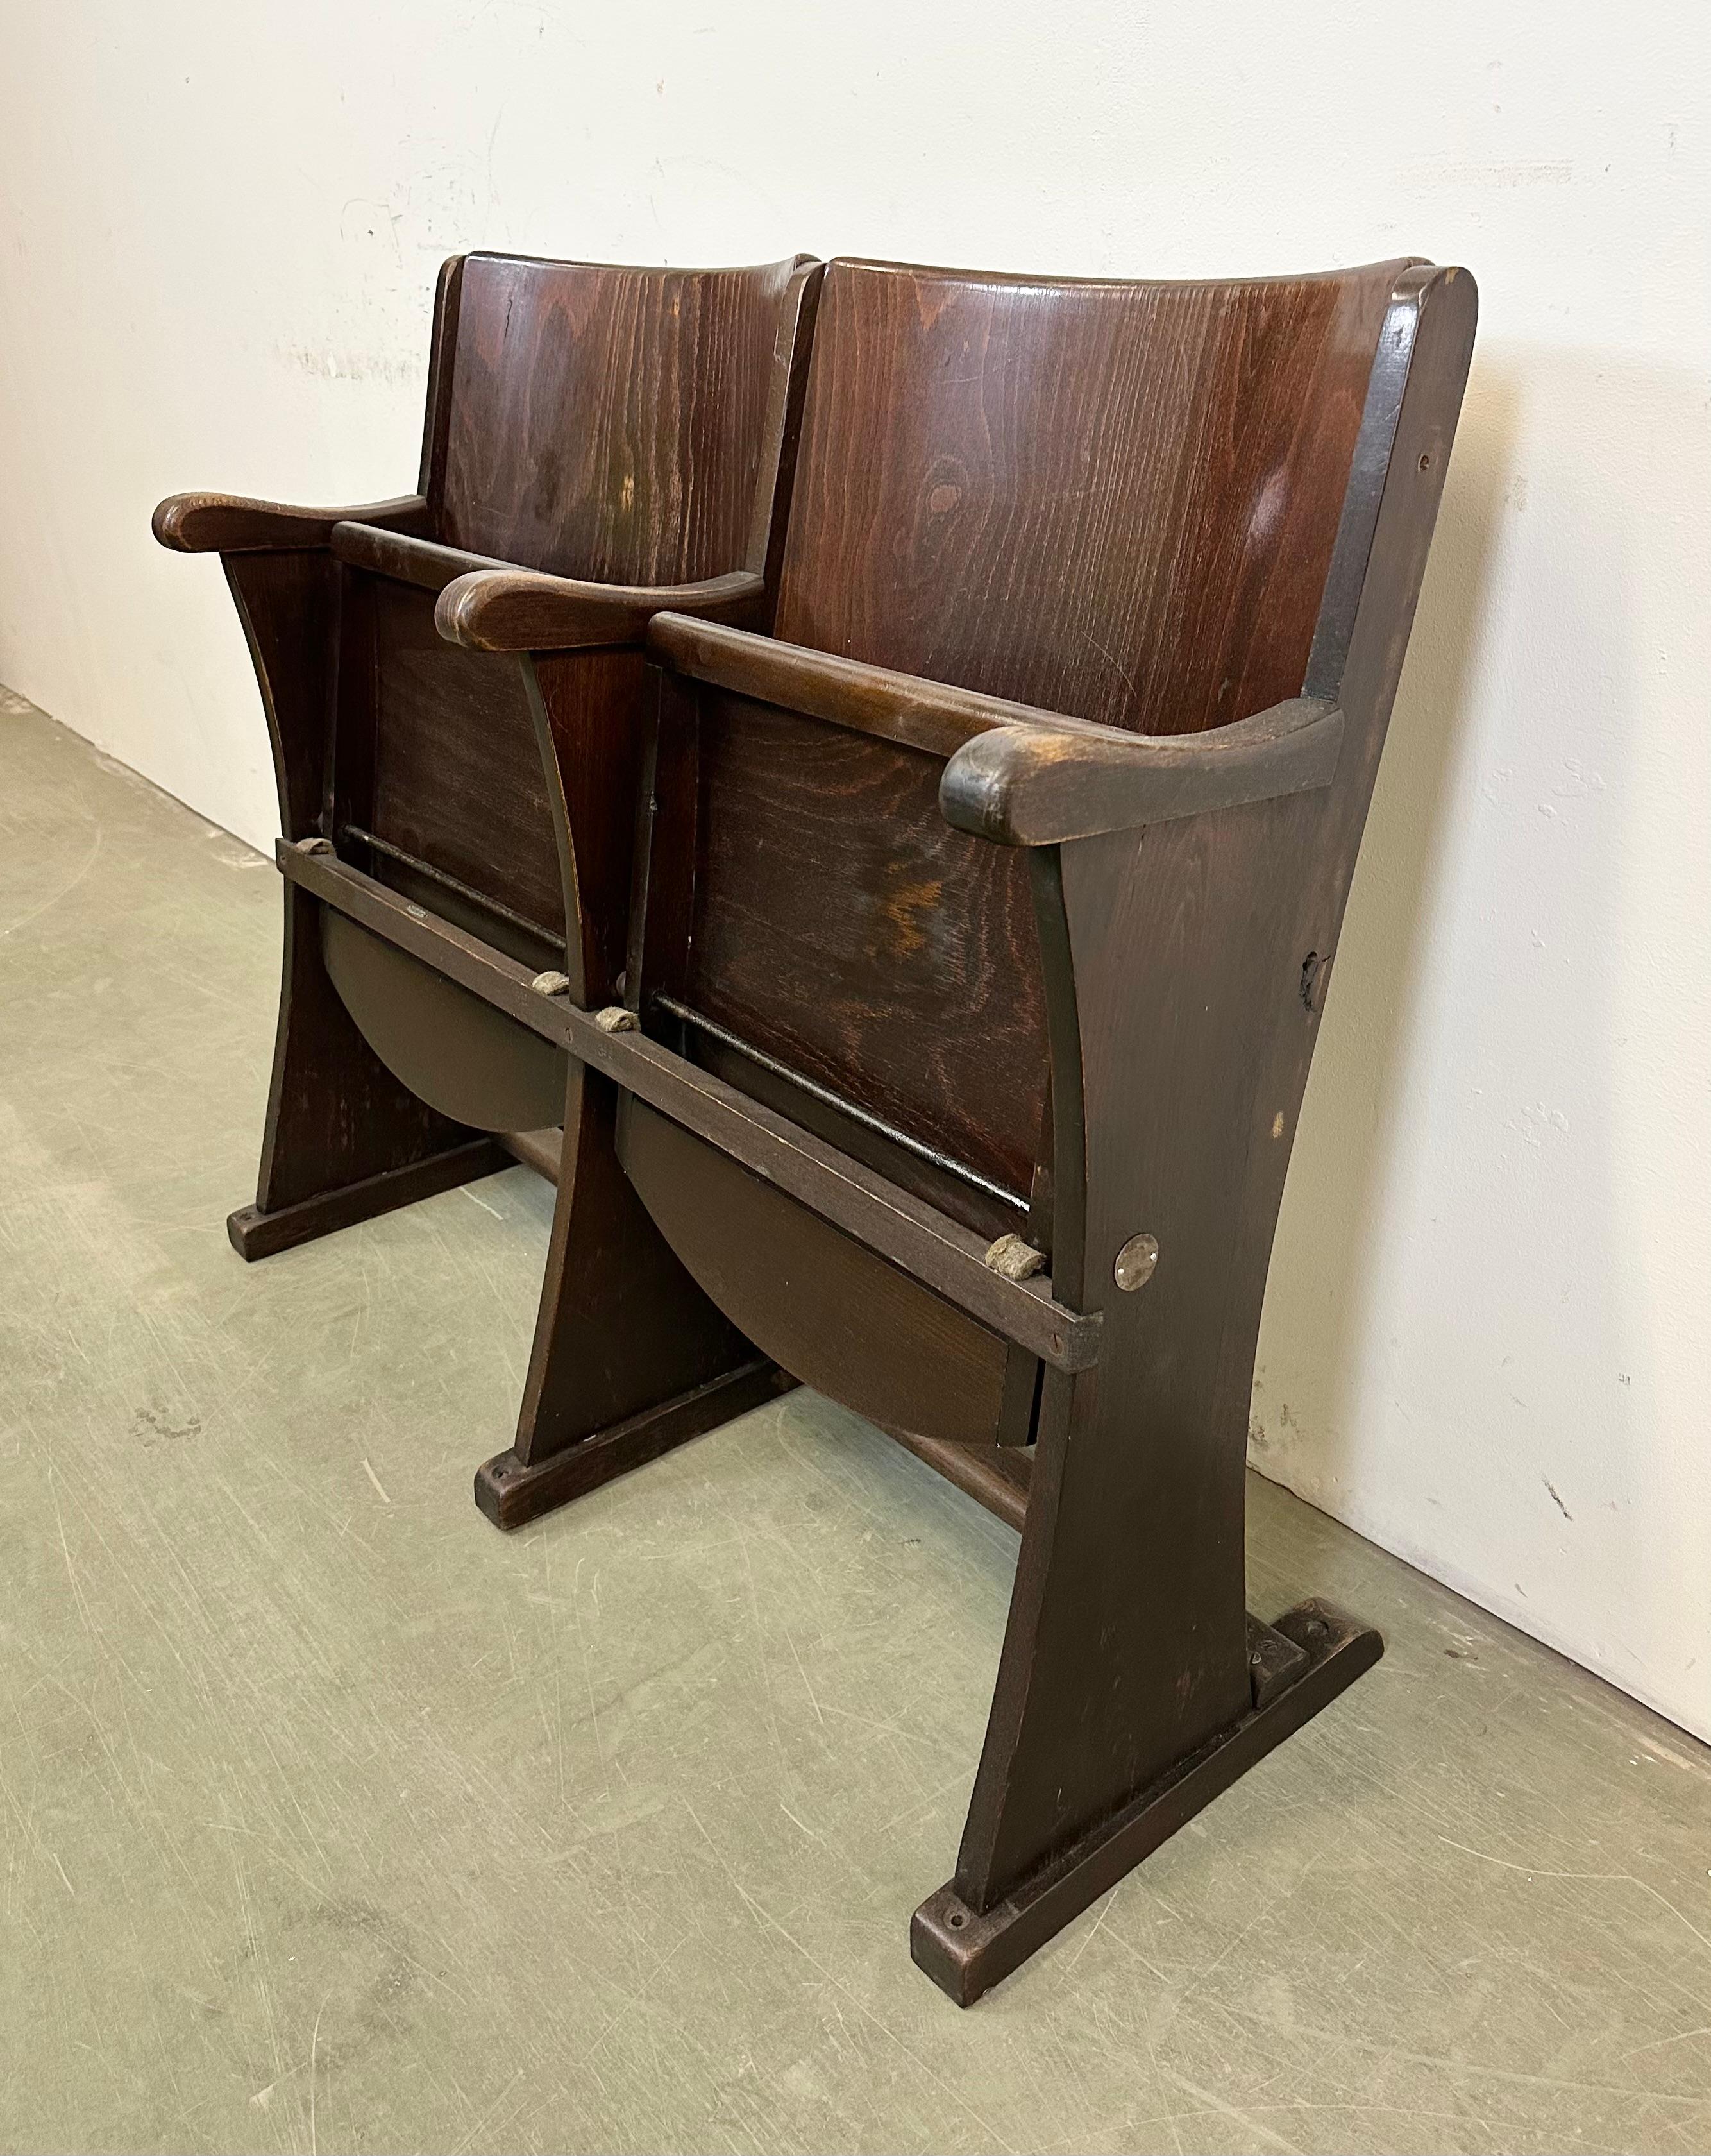 Vintage Two-Seat Cinema Bench from Thonet, 1950s In Good Condition For Sale In Kojetice, CZ